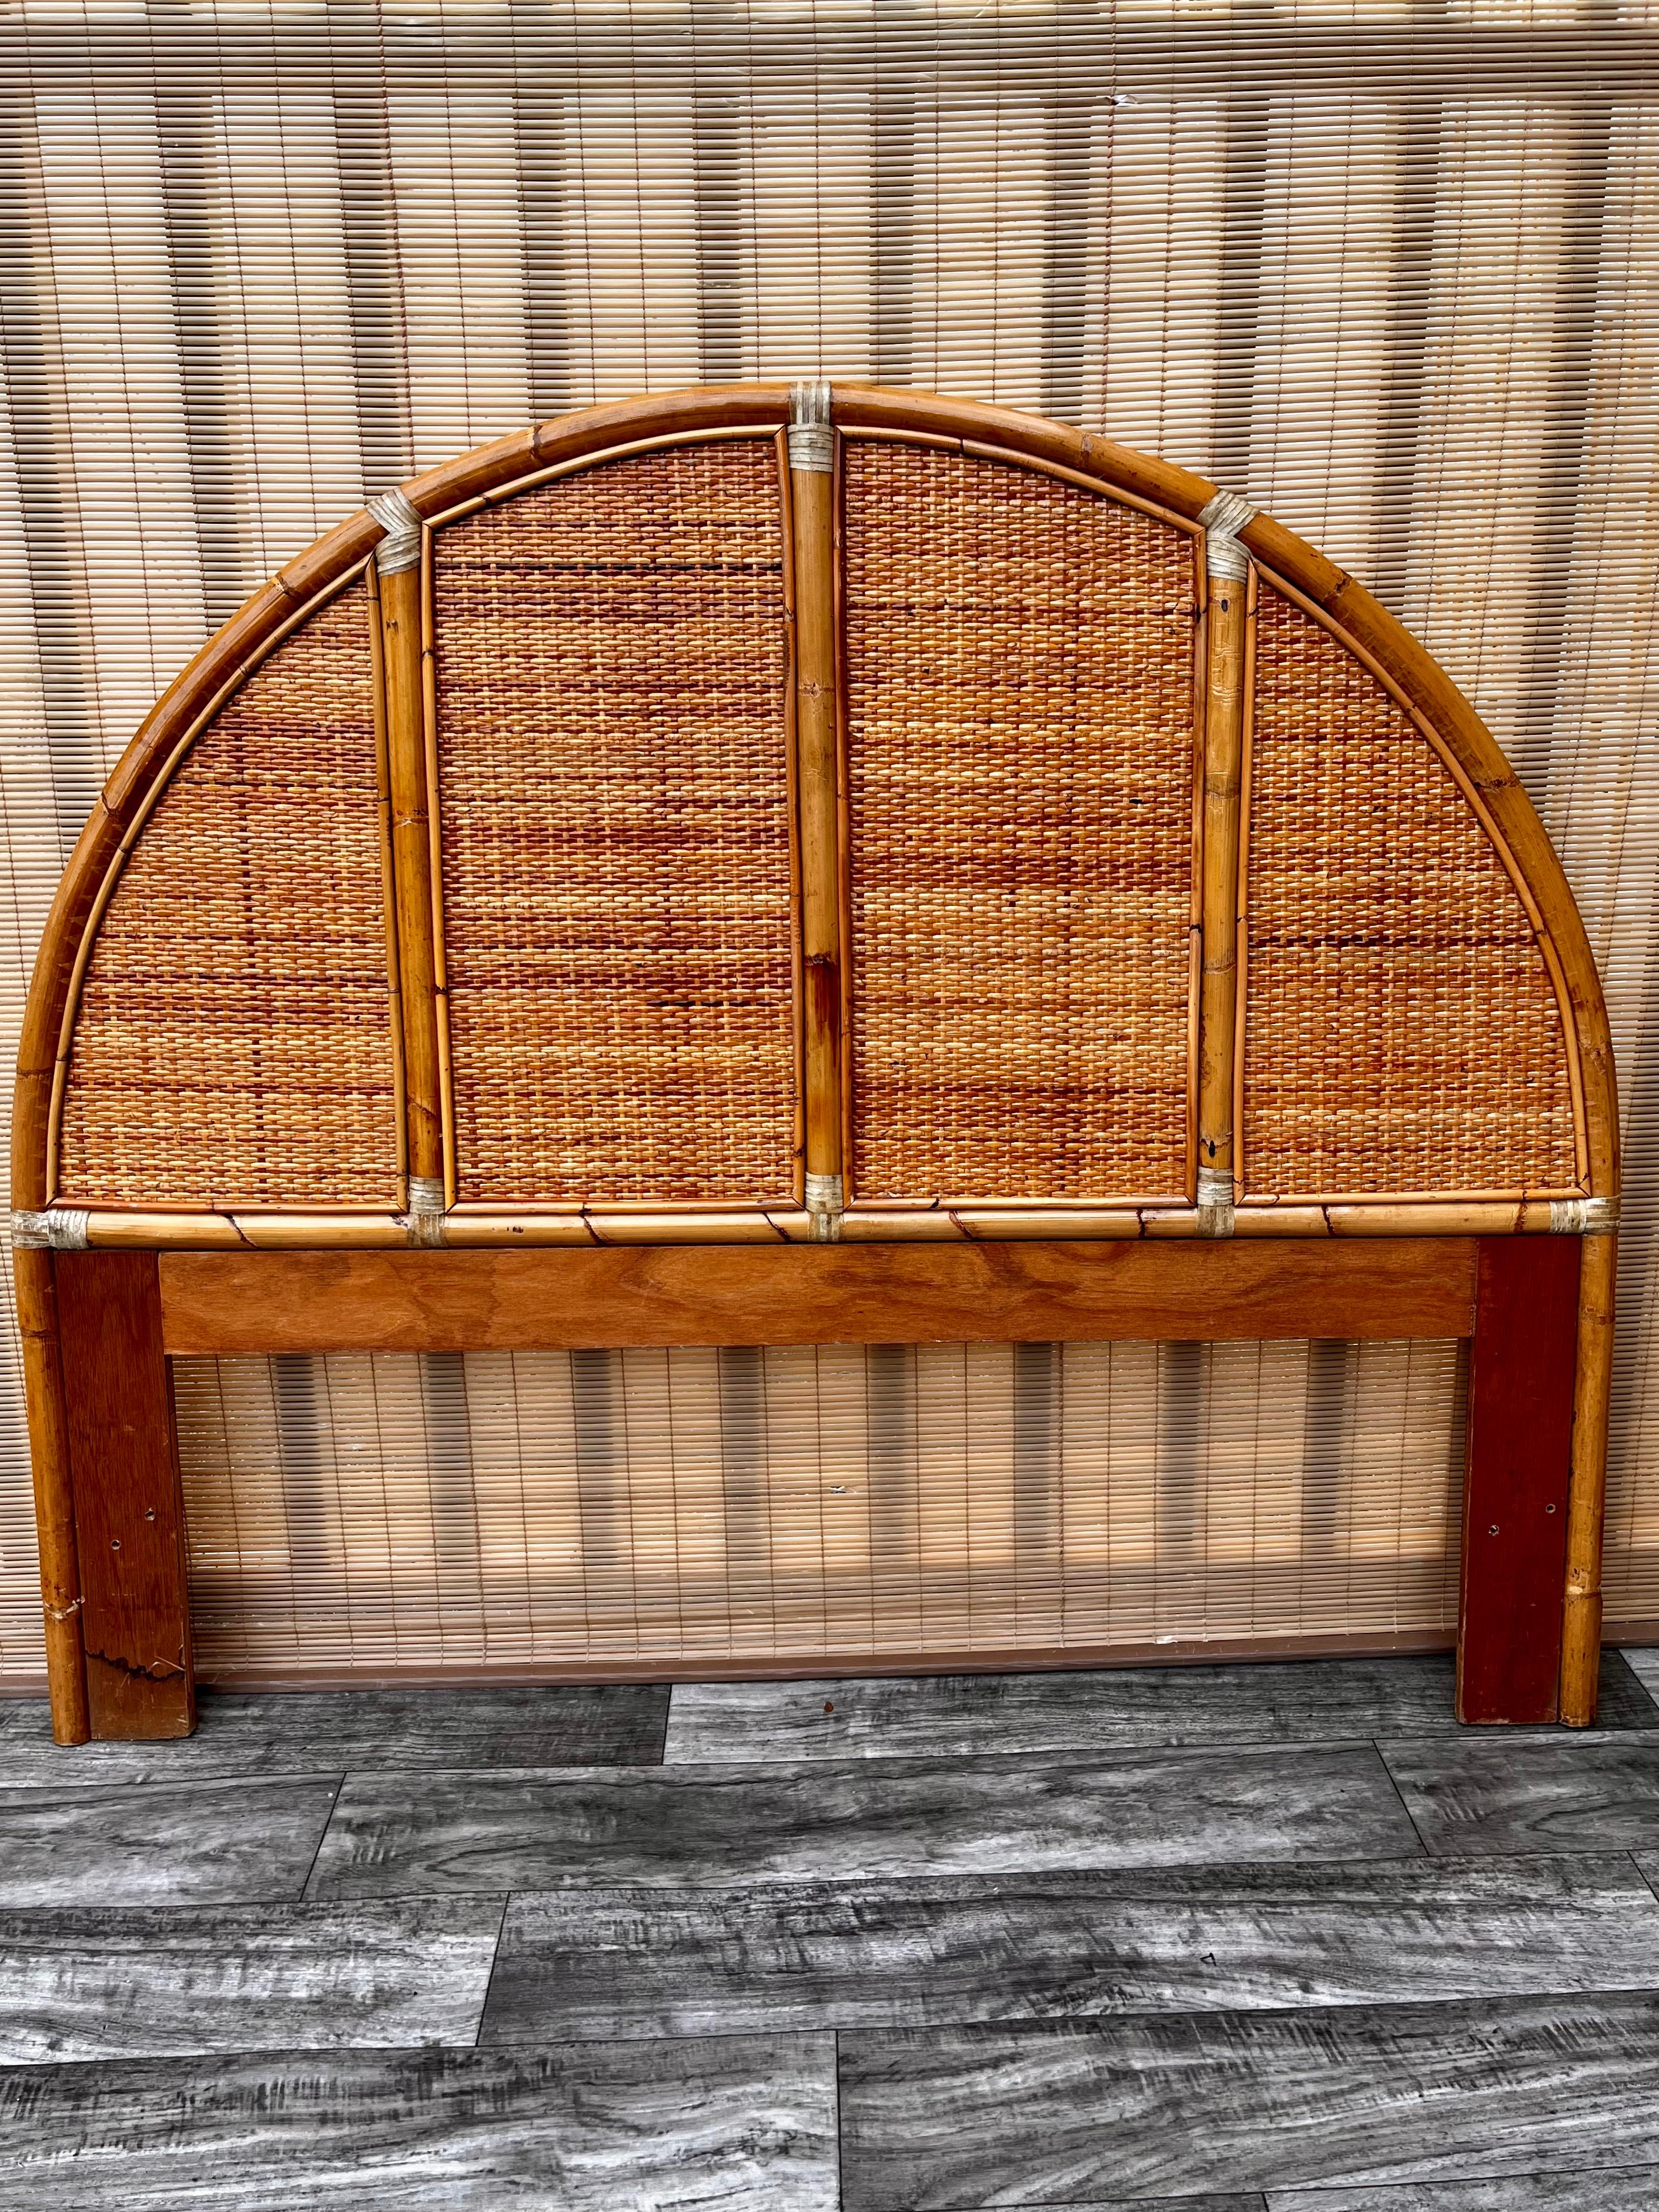 Vintage Boho Chic / Coastal Style Arched Rattan Queen Headboard in the McGuire's Style. circa 1980s.
Features a gracefully arched rattan frame with four woven cane panels and leather straps.
In excellent original condition with very minor signs of